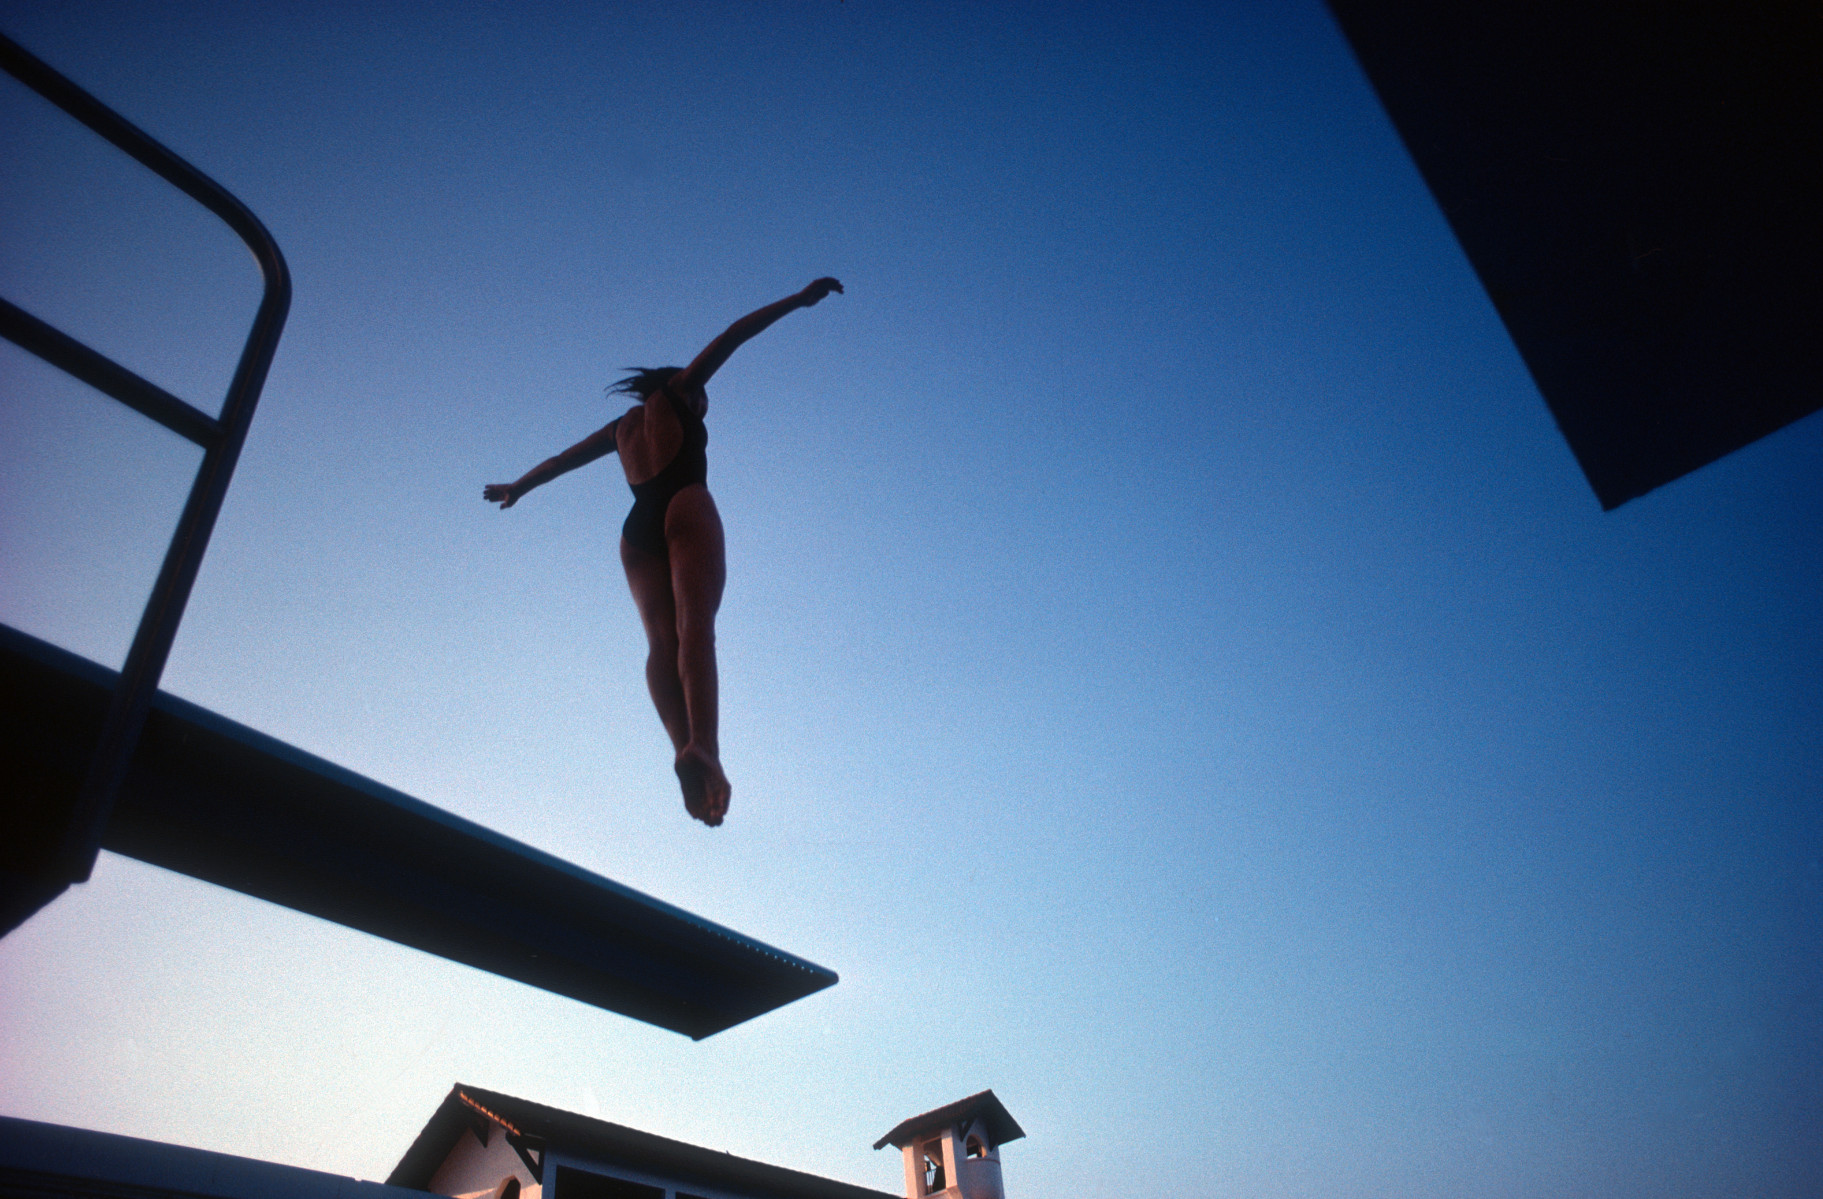 Diving practice, 
Ft. Lauderdale, Florida : Sports : Photography by Adam Stoltman: Sports Photography, The Arts, Portraiture, Travel, Photojournalism and Fine Art in New York